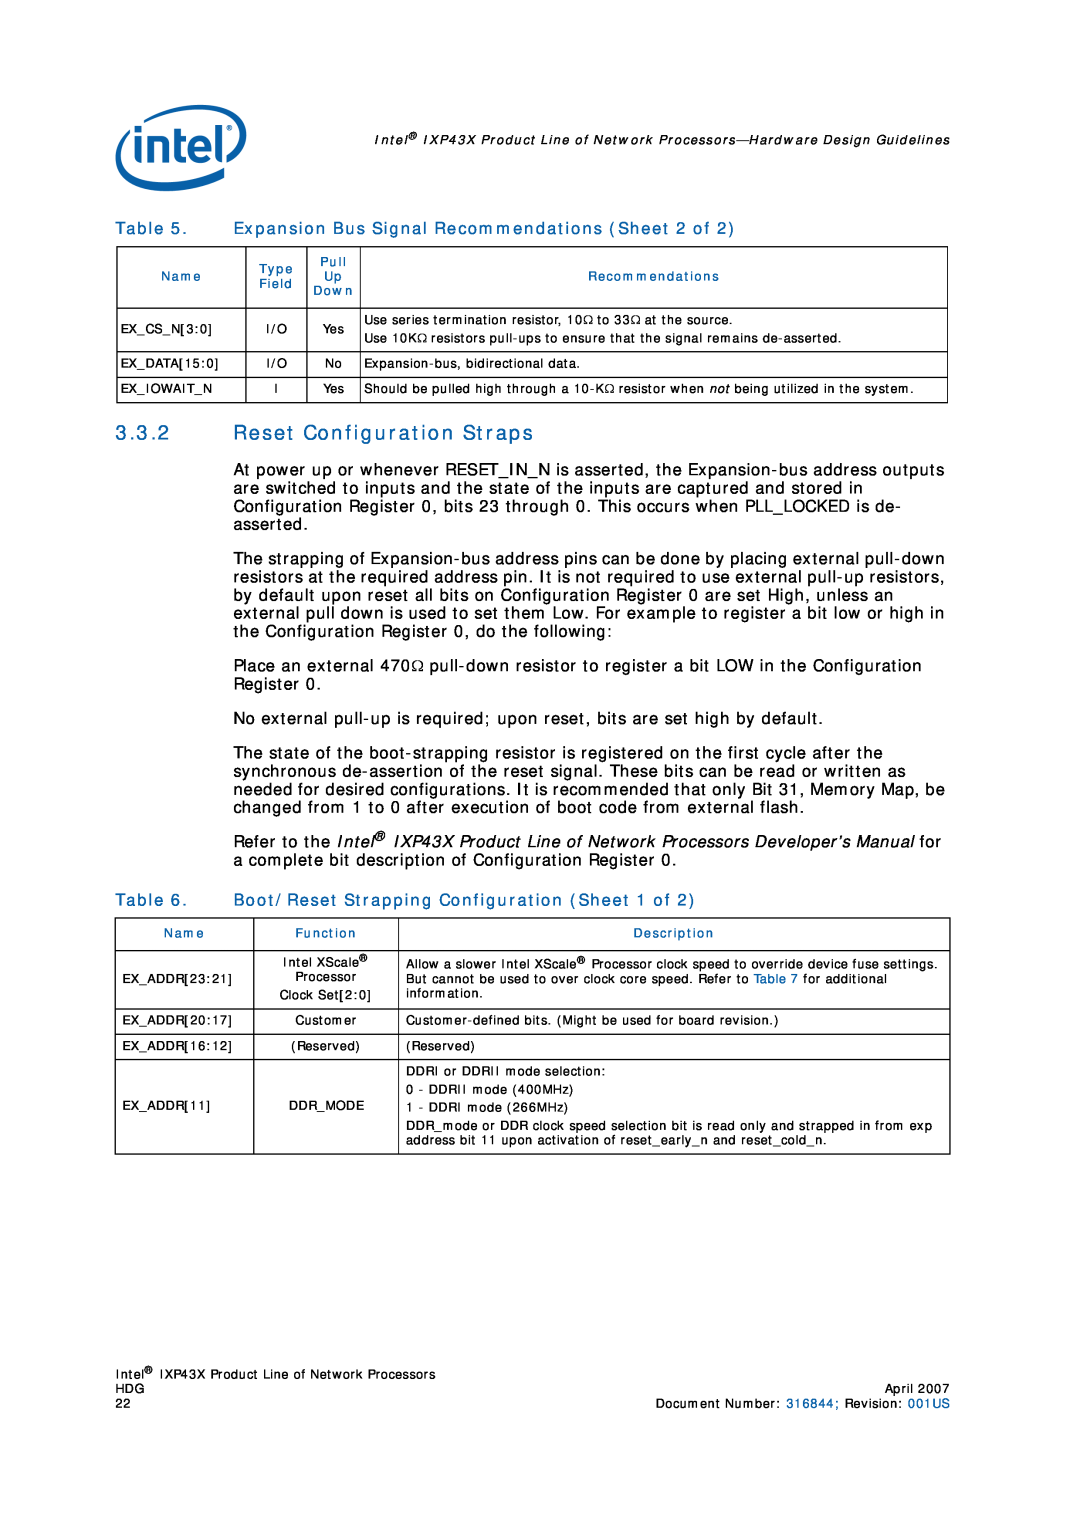 Intel IXP43X manual Reset Configuration Straps, Expansion Bus Signal Recommendations Sheet 2 of 